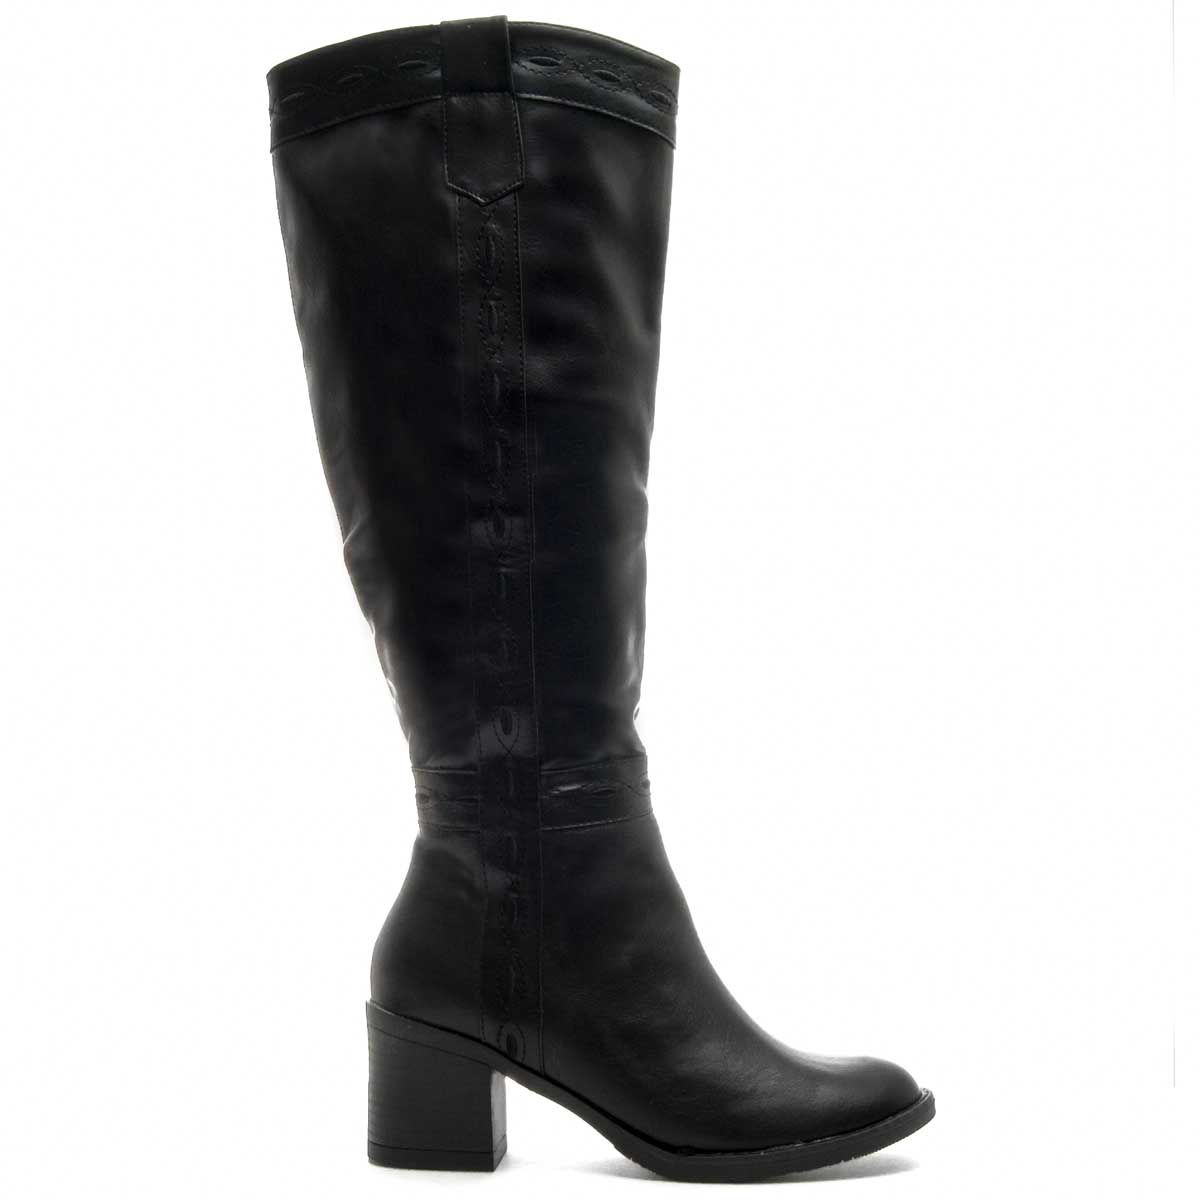 Capsula Kylie collection. High Comfortable Woman Boot. Comfortable wide heel. Material adaptable to the leg. Zip closure on the side. Previous and later buttress. Anti-slip rubber floor. Inner textile material. Padded template. Sewing doubly reinforced. Comfortable Hormo. Easy to clean material.